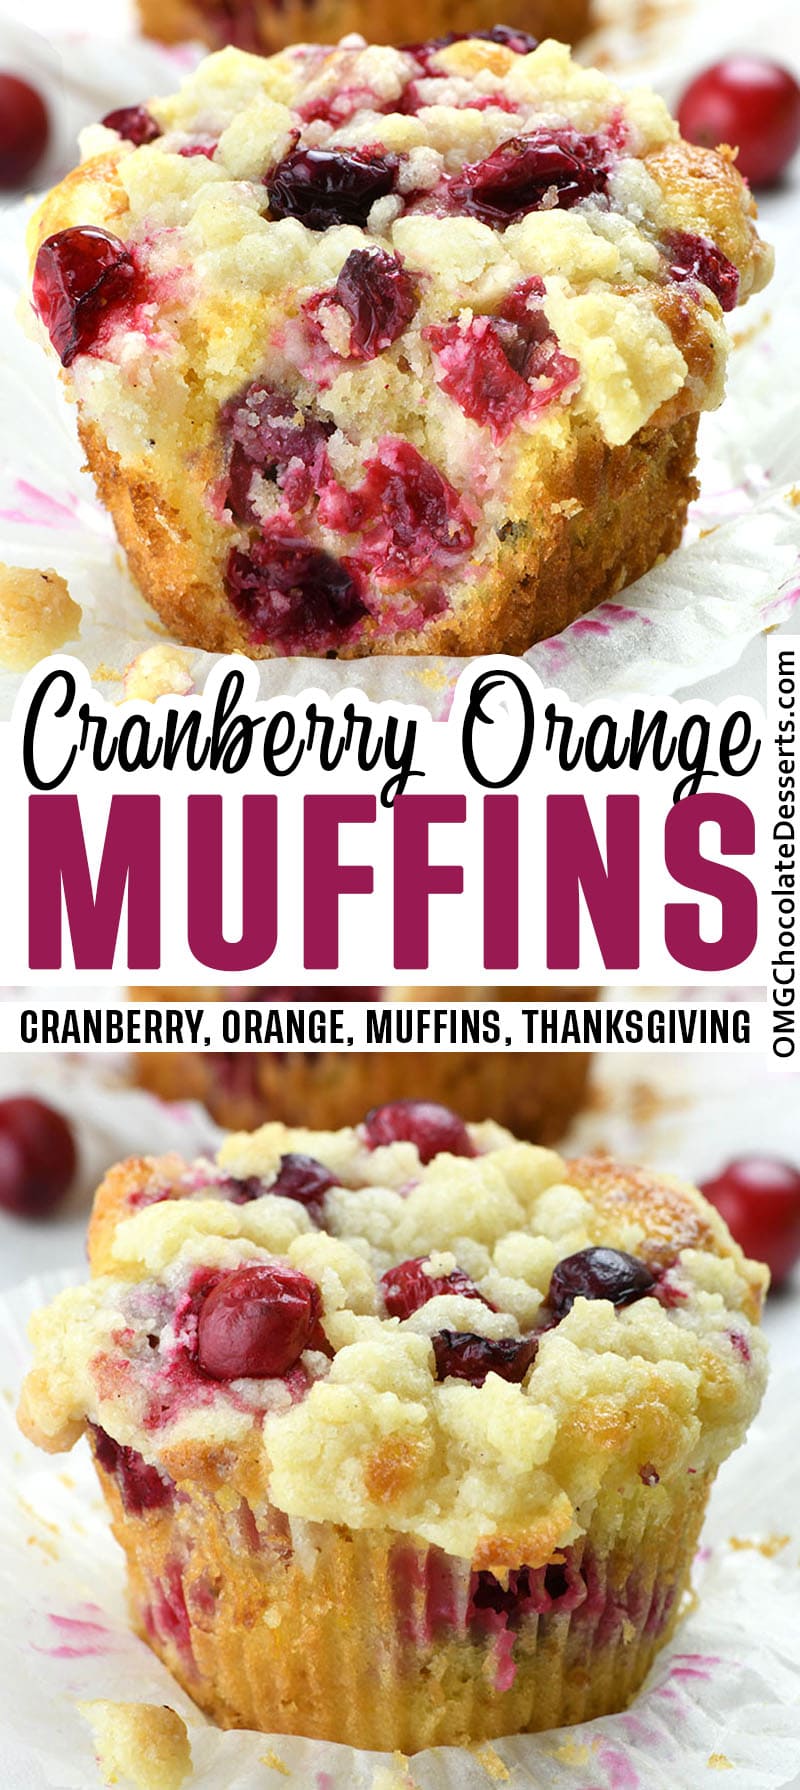 Two Cranberry Orange Muffins with Streusel Topping images with title text between them.